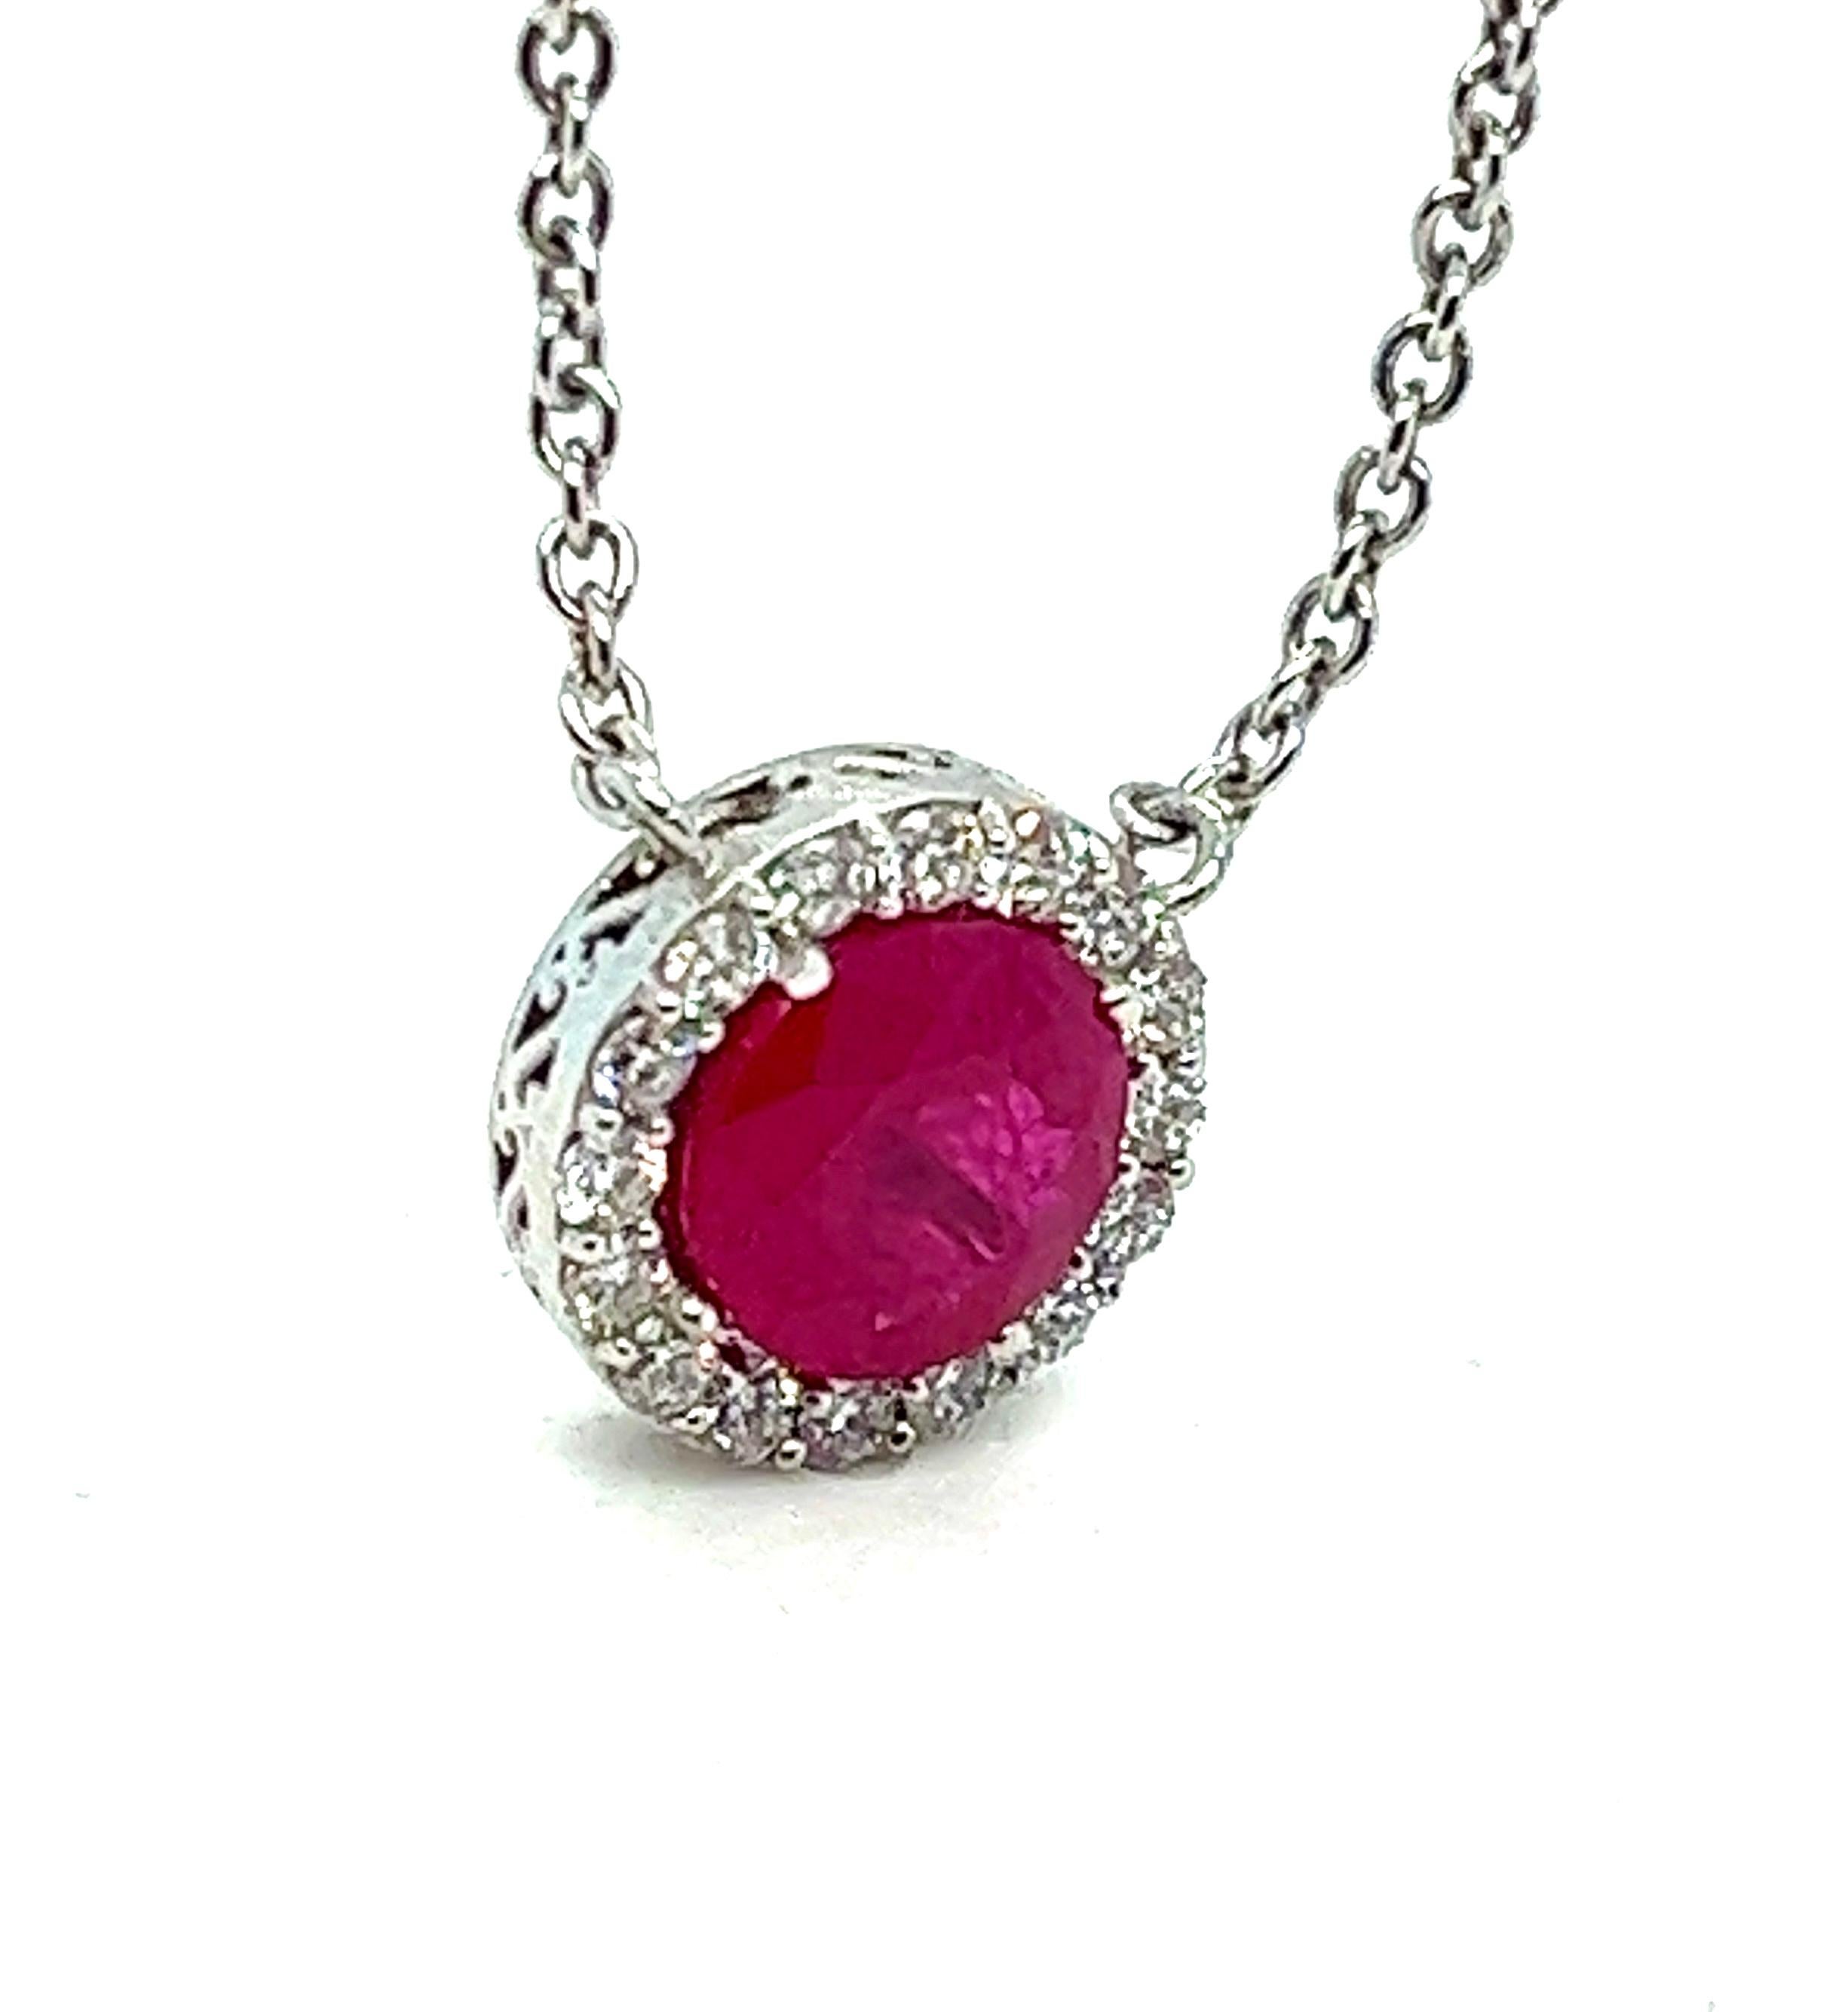 Offered here is an exquisite natural earth mined red ruby and pavé diamond pendant with a total diamond weight of 0.35 carat and showcasing a round 1.70 carats ruby.
Pendant is about 11 mm in diameter.
Crafted in solid 18 karat white gold, hanging